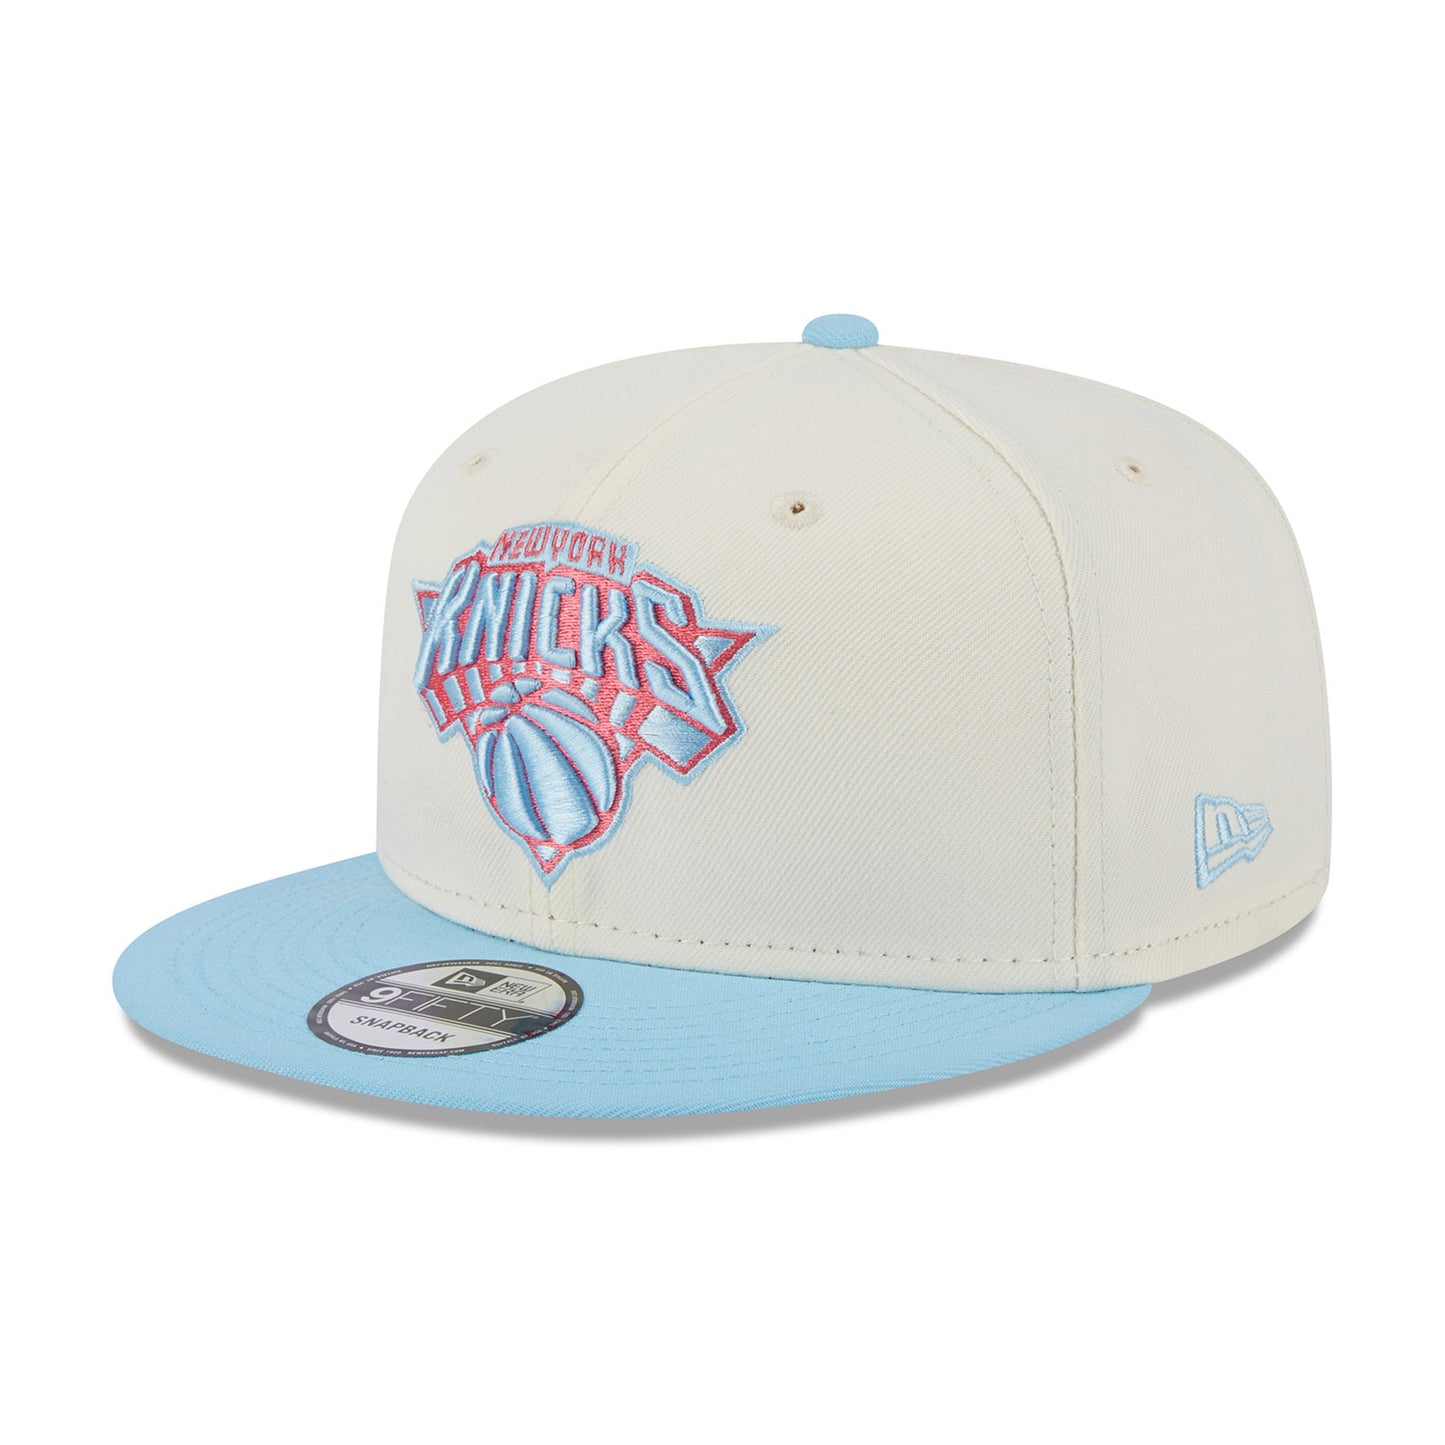 New Era Knicks Colorpack Two Tone Snapback Chrome/Light Blue Hat In White & Blue - Angled Left Side View